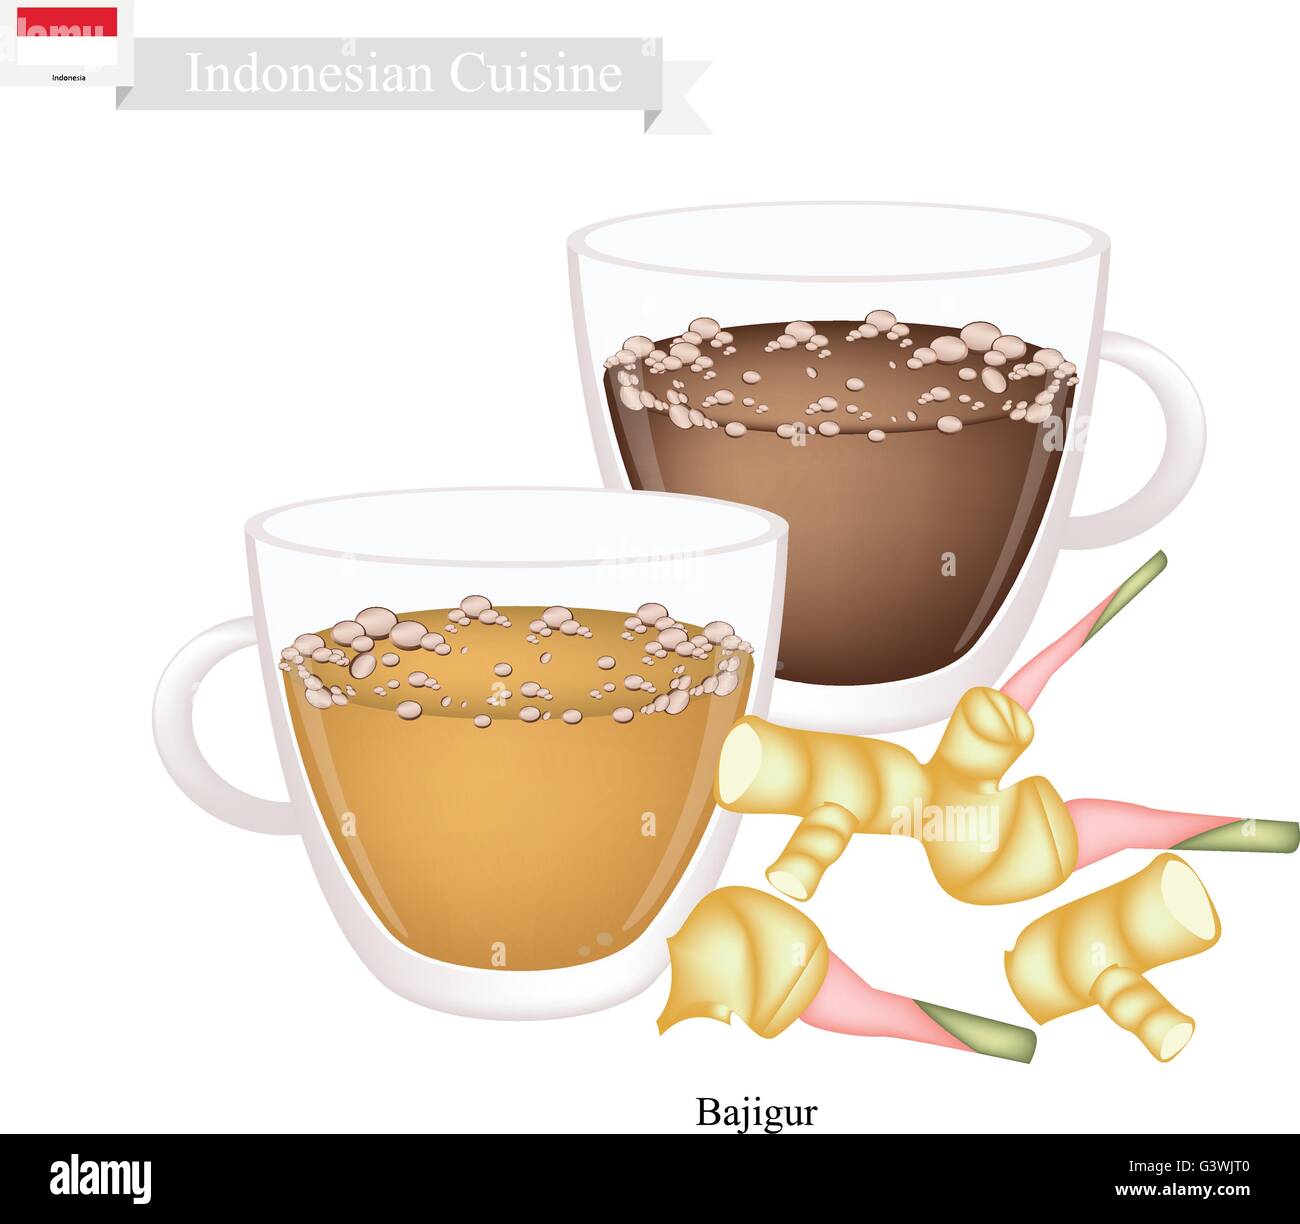 https://c8.alamy.com/comp/G3WJT0/indonesian-cuisine-bajigur-or-traditional-hot-sweet-coffee-with-ginger-G3WJT0.jpg